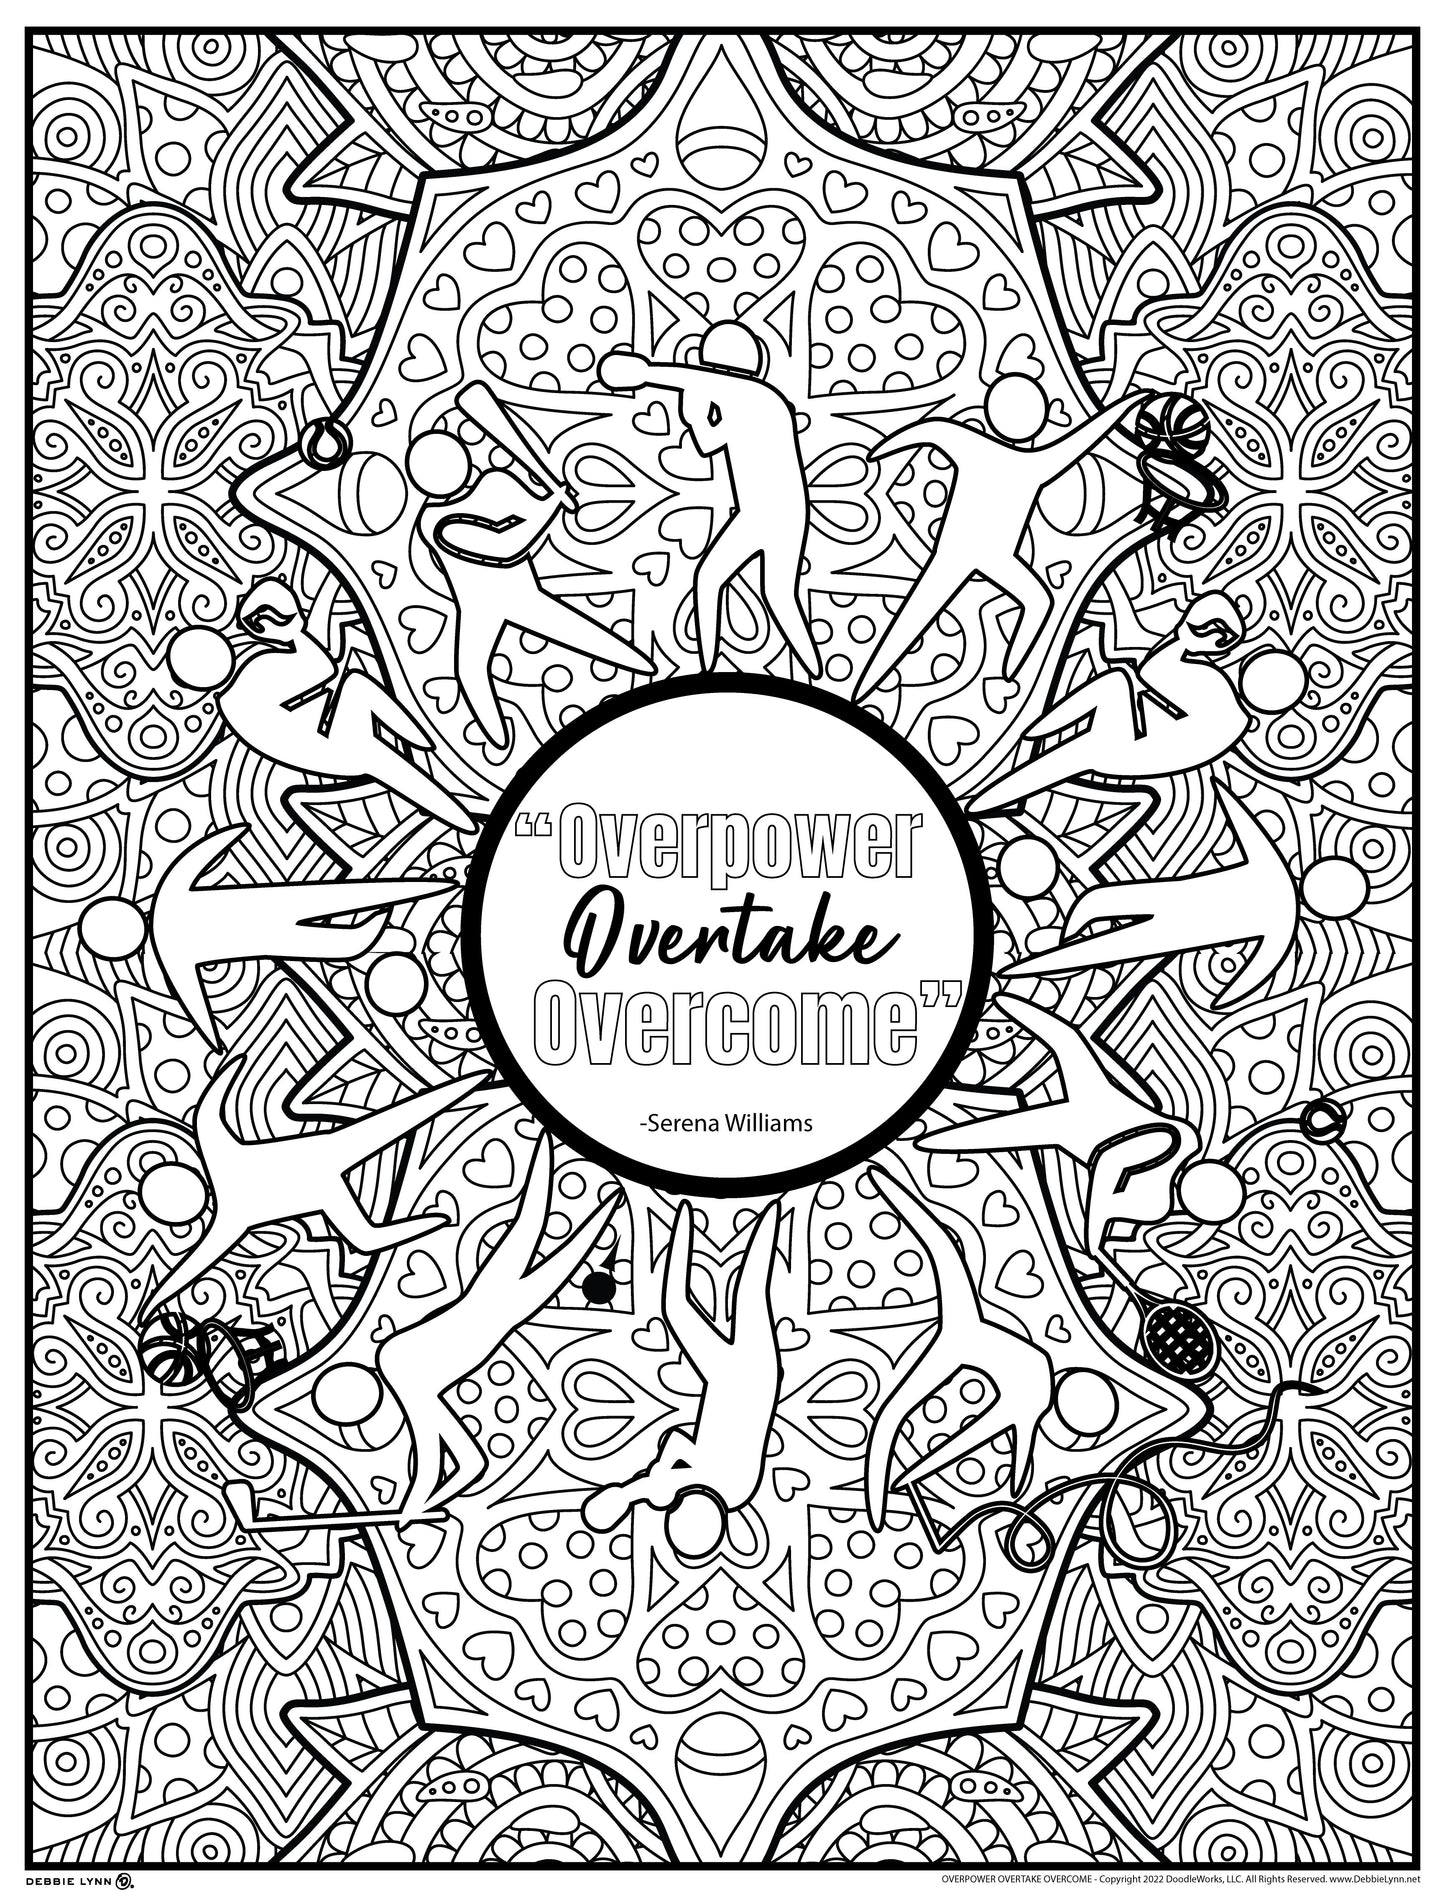 Overpower Overtake Overcome Personalized Giant Coloring Poster 46"x60"